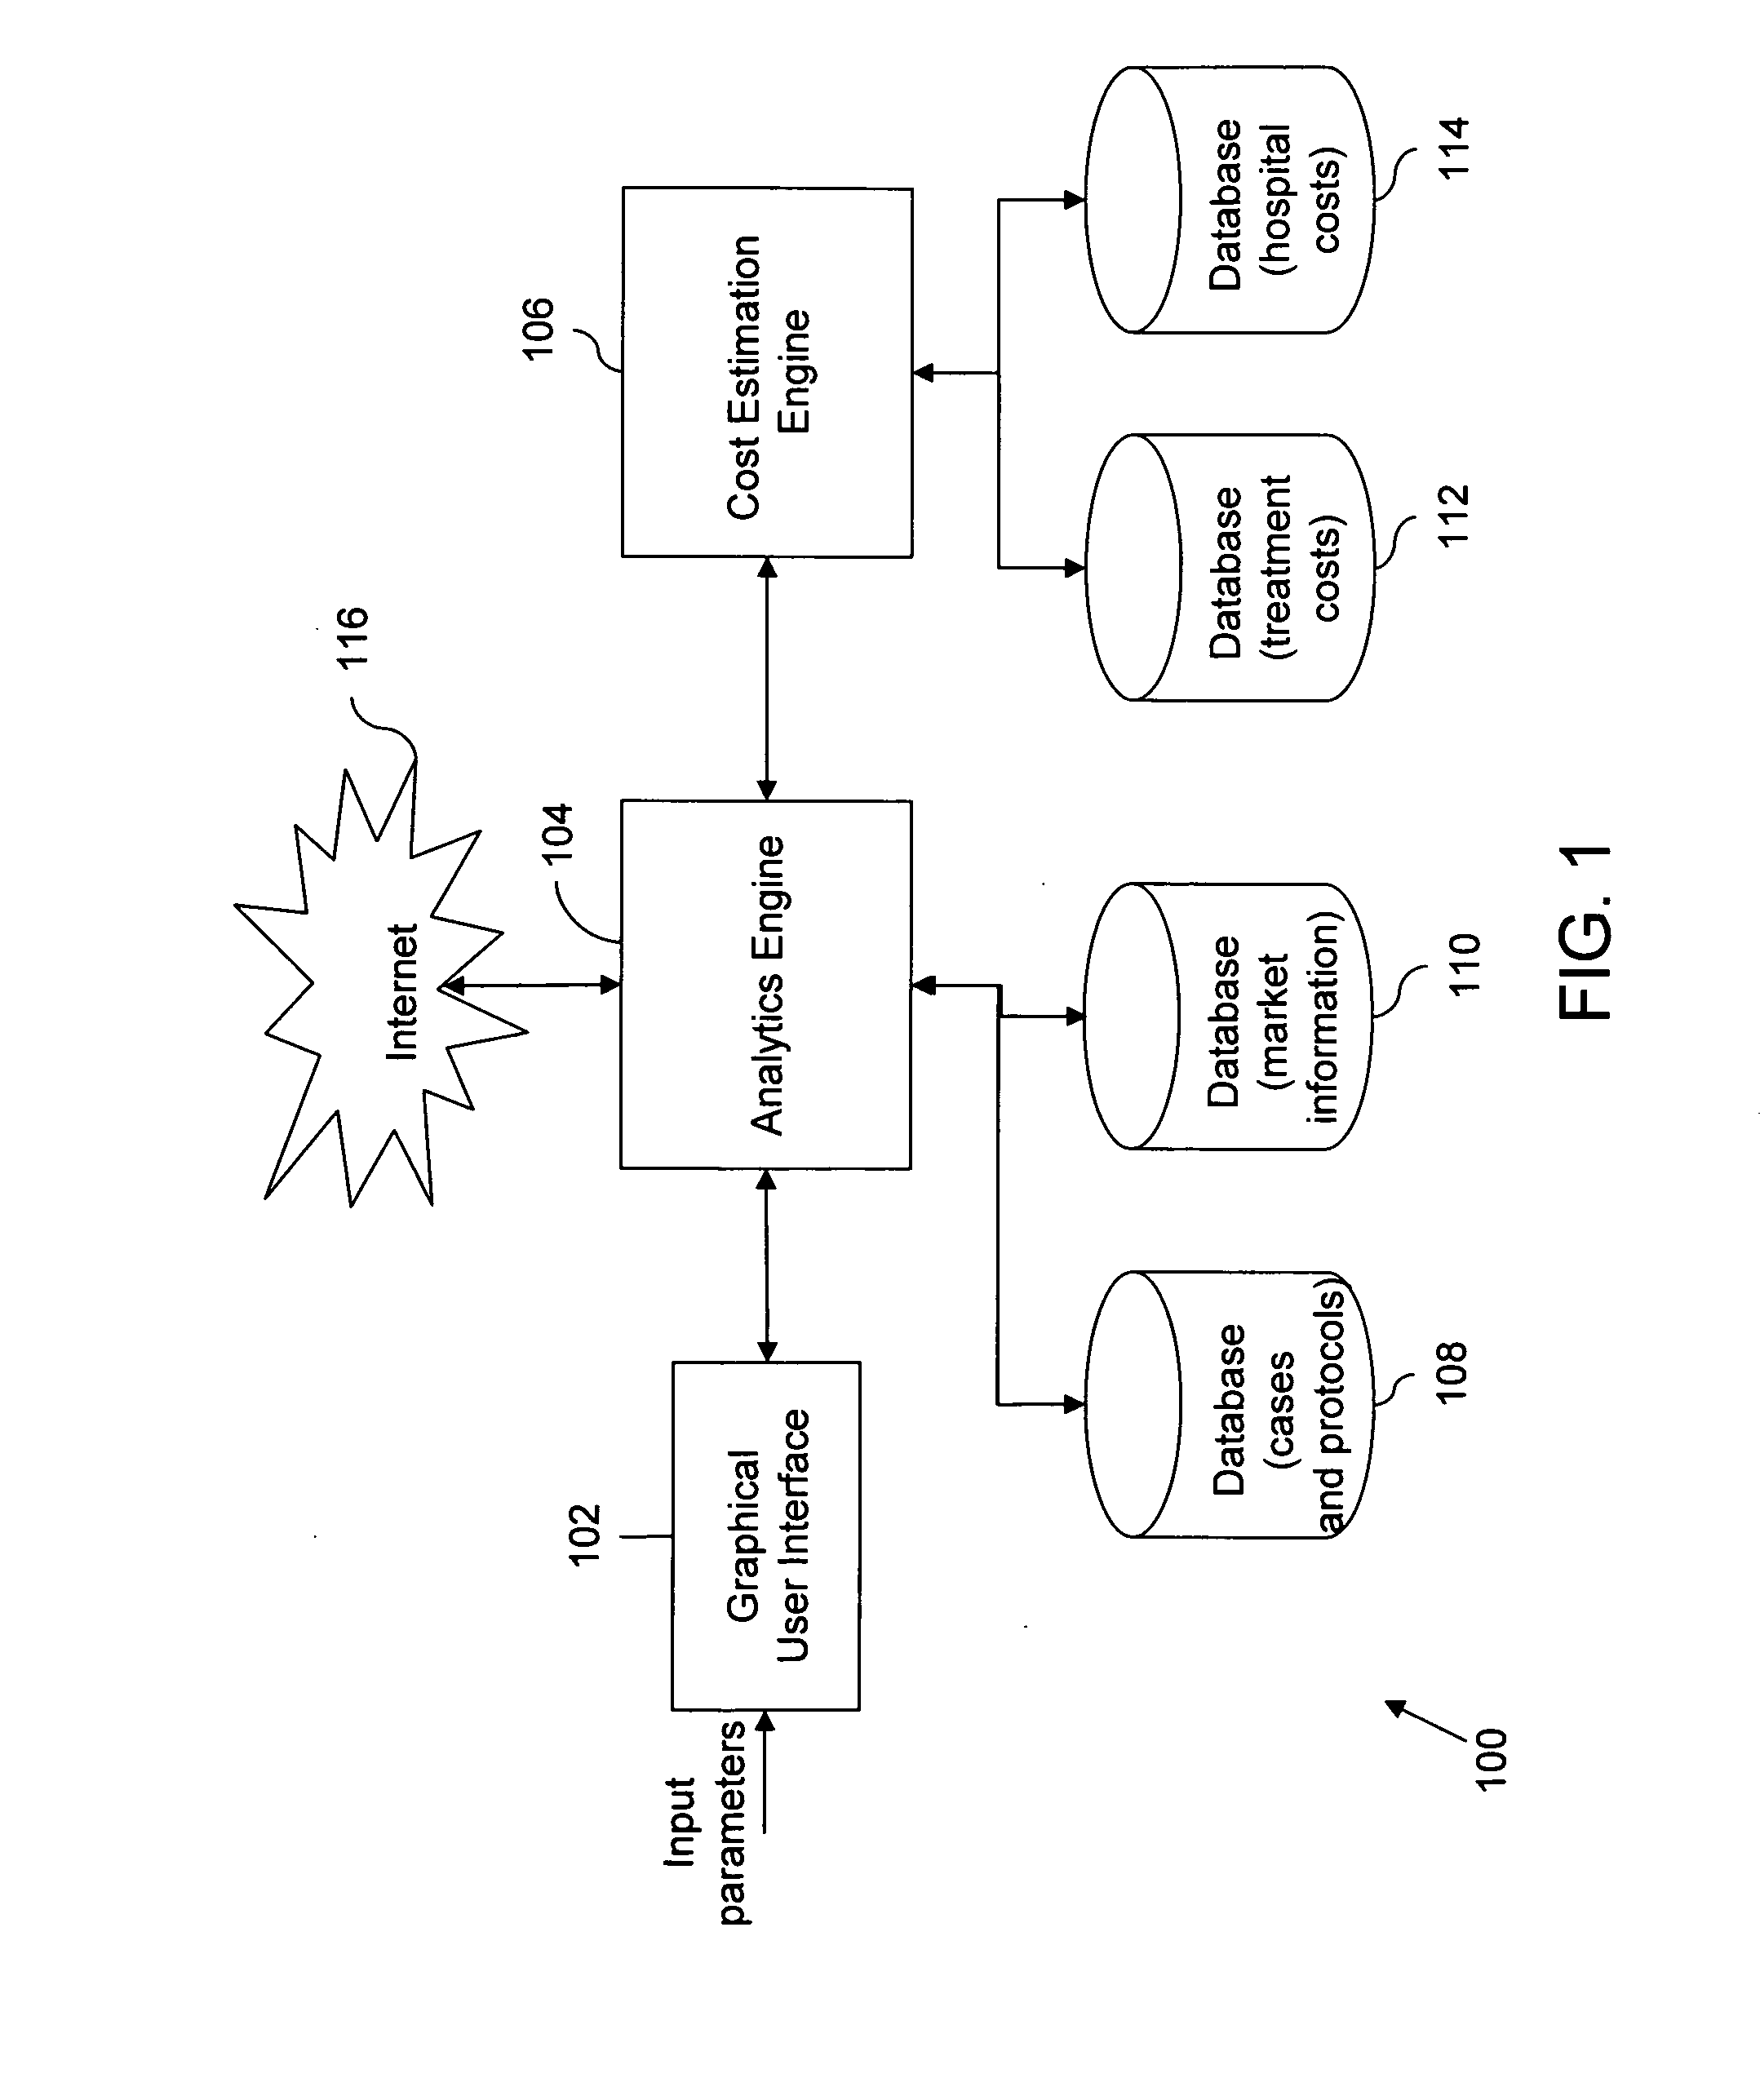 System and method for cost-benefit analysis for treatment of cancer